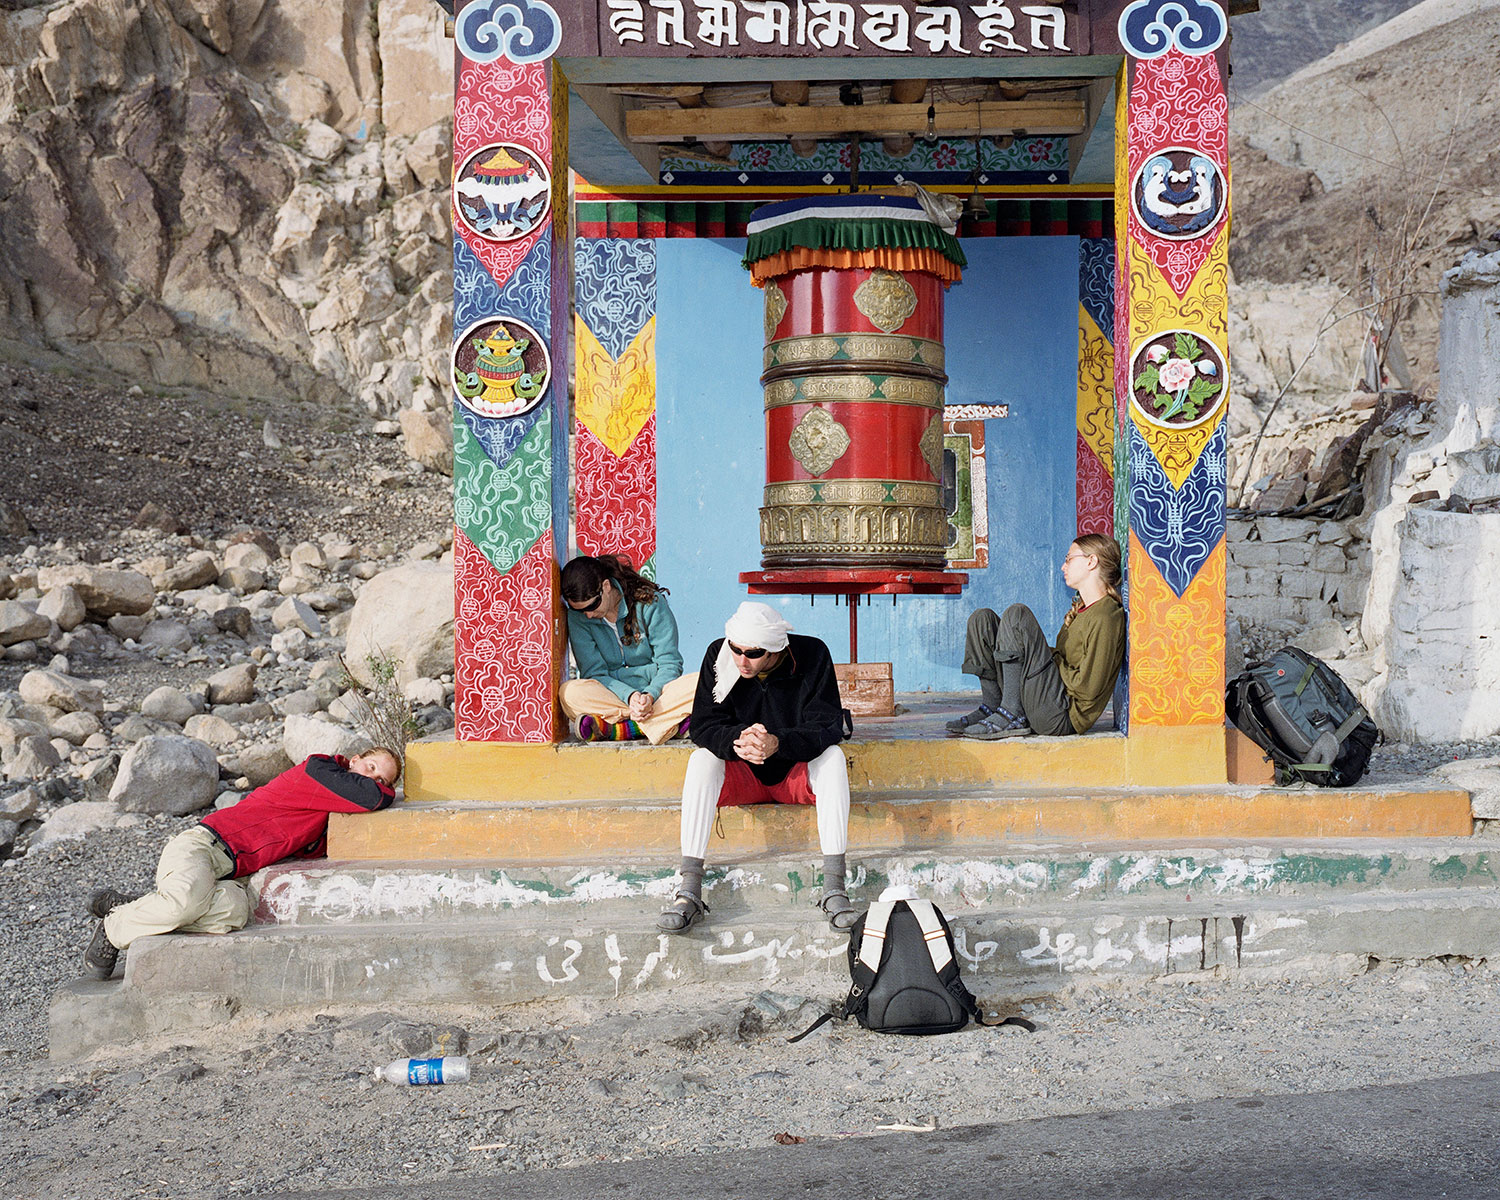 Four Israeli backpackers wait for their bus by a Buddhist prayer wheel in Hunder, India, August 2007.